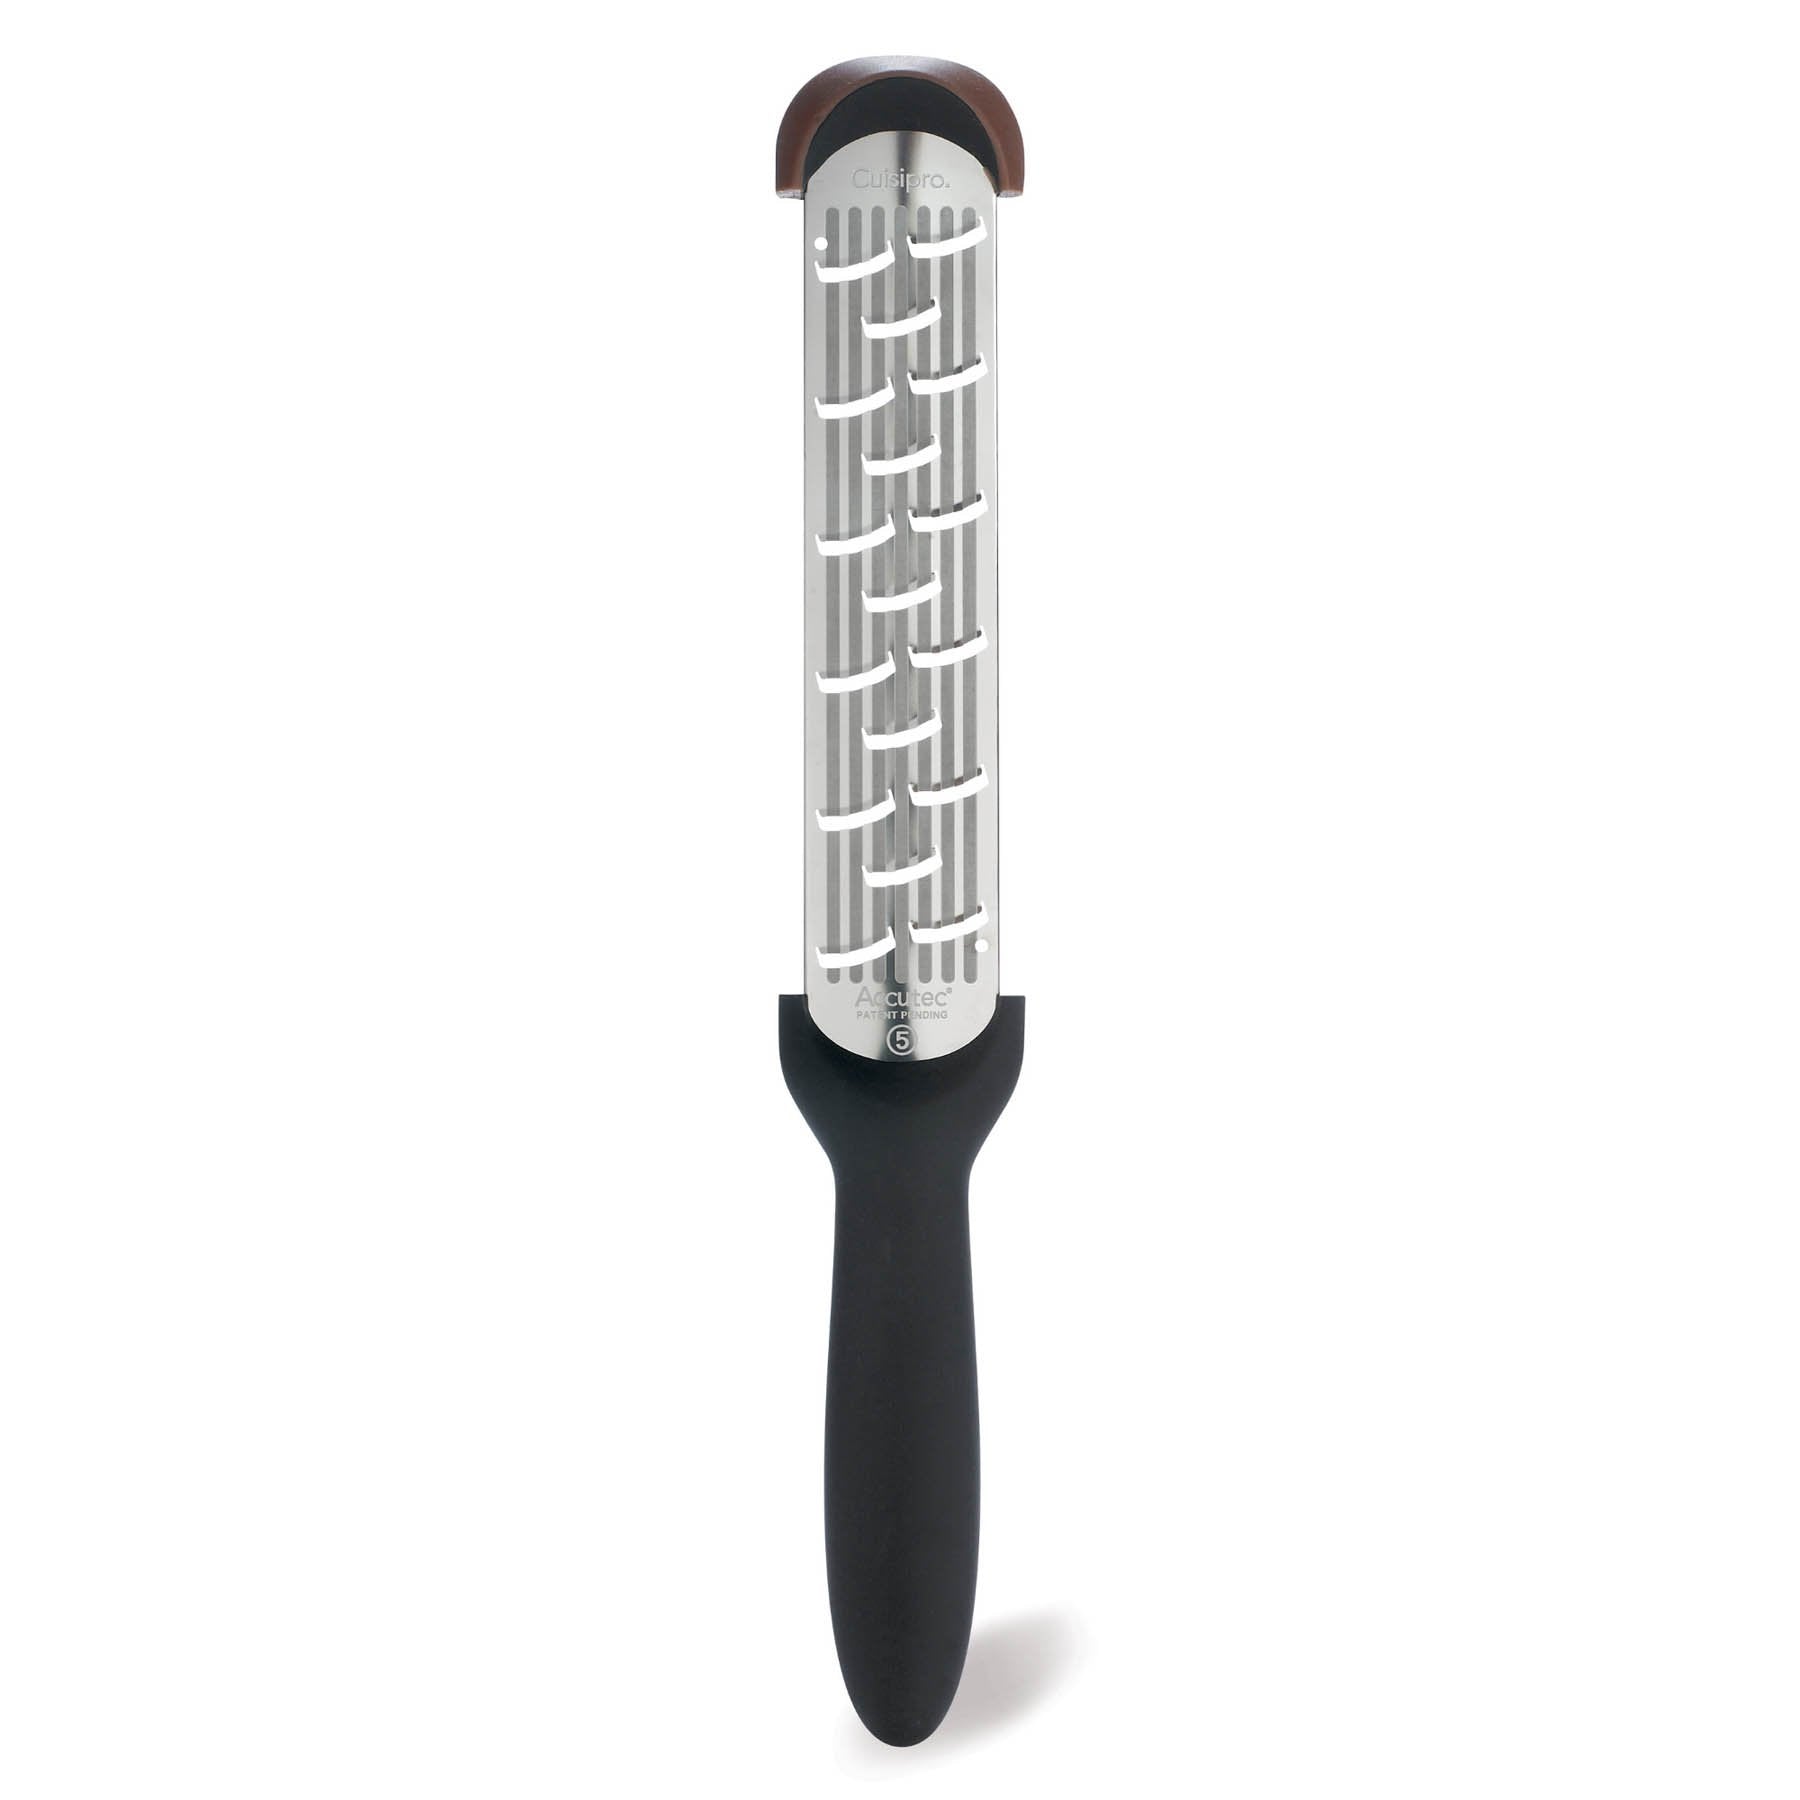 Mixing Bowl Grater Fine Grater for Zesting & Spicing - Black and Grey